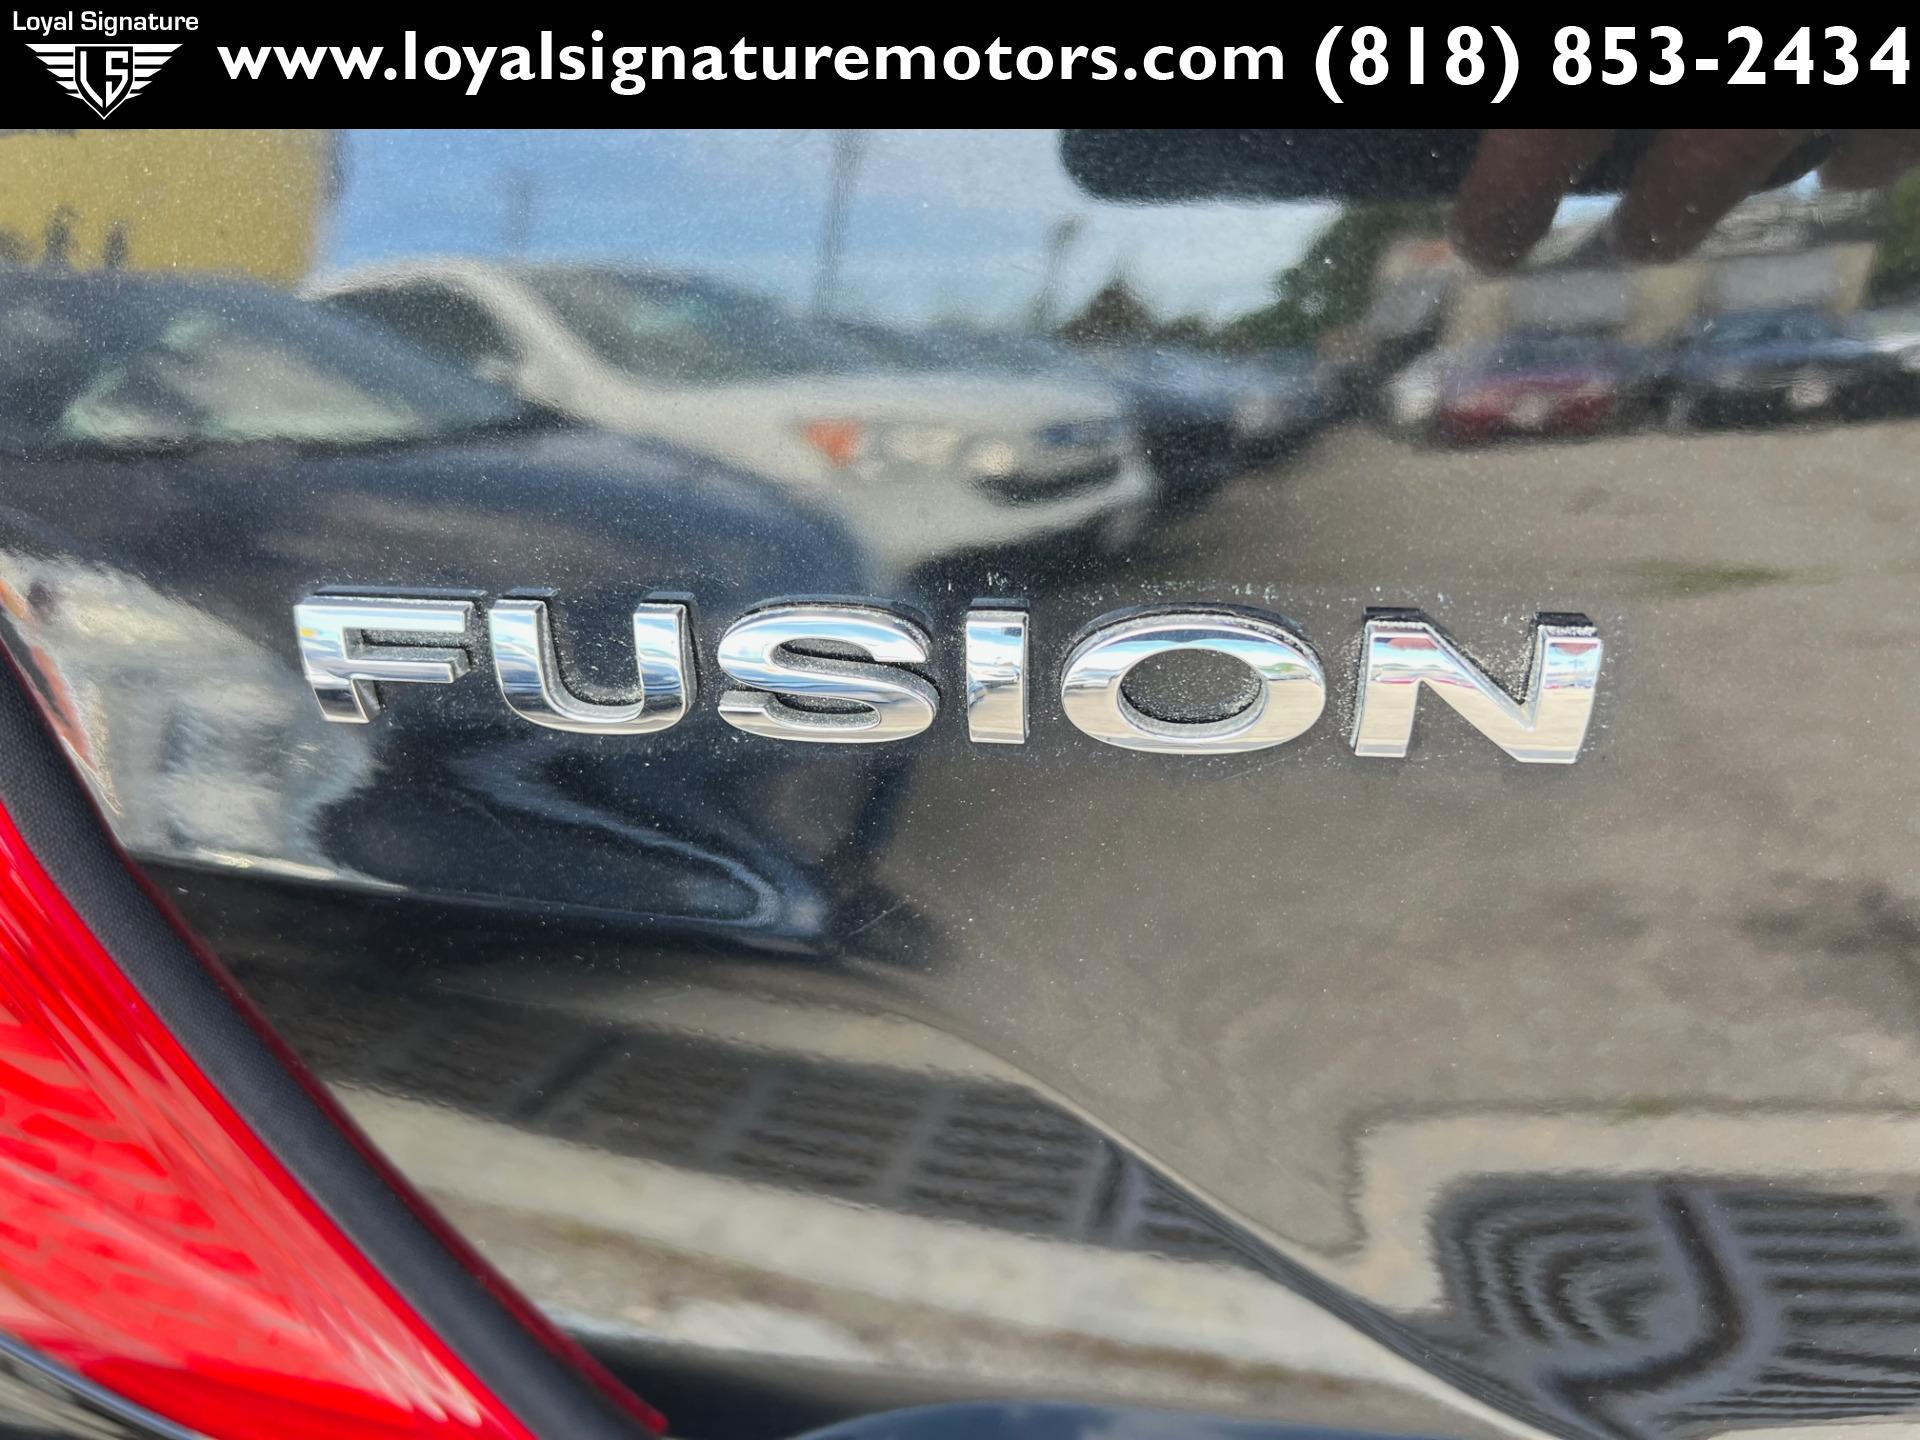 Used-2012-Ford-Fusion-Hybrid